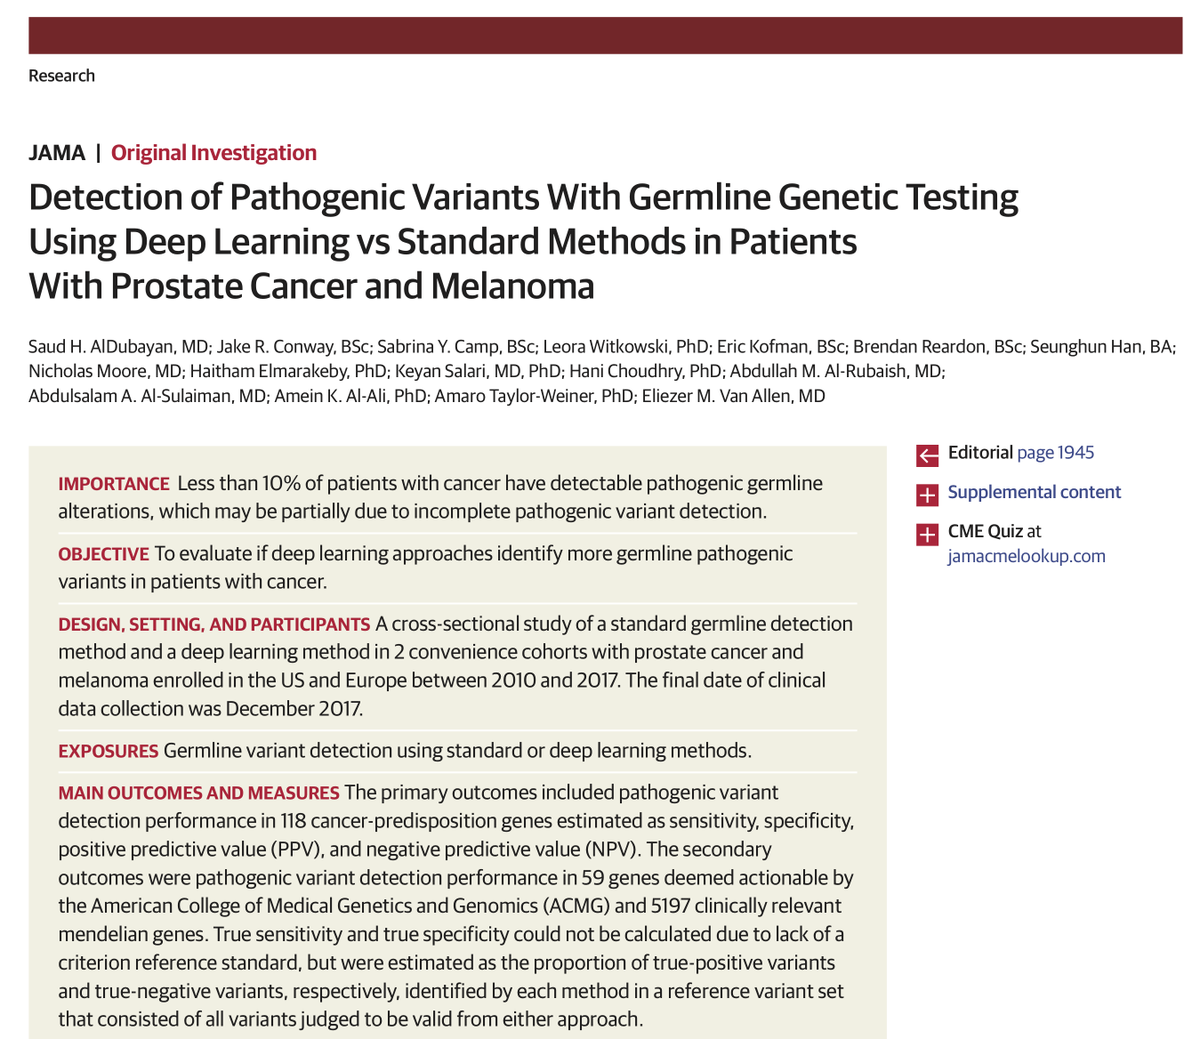 Very excited to see our work on deep learning germline variant characterization out today in  @JAMA_currentHere is a quick thread on the major findings and takeaways from this study.  #CancerResearch  #ProstateCancer  #Melanoma 1/n https://jamanetwork.com/journals/jama/fullarticle/10.1001/jama.2020.20457?guestAccessKey=39889aad-2894-4380-b869-5704ed2f9f6b&utm_source=twitter&utm_medium=social_jama&utm_term=4168566540&utm_campaign=article_alert&linkId=104709446